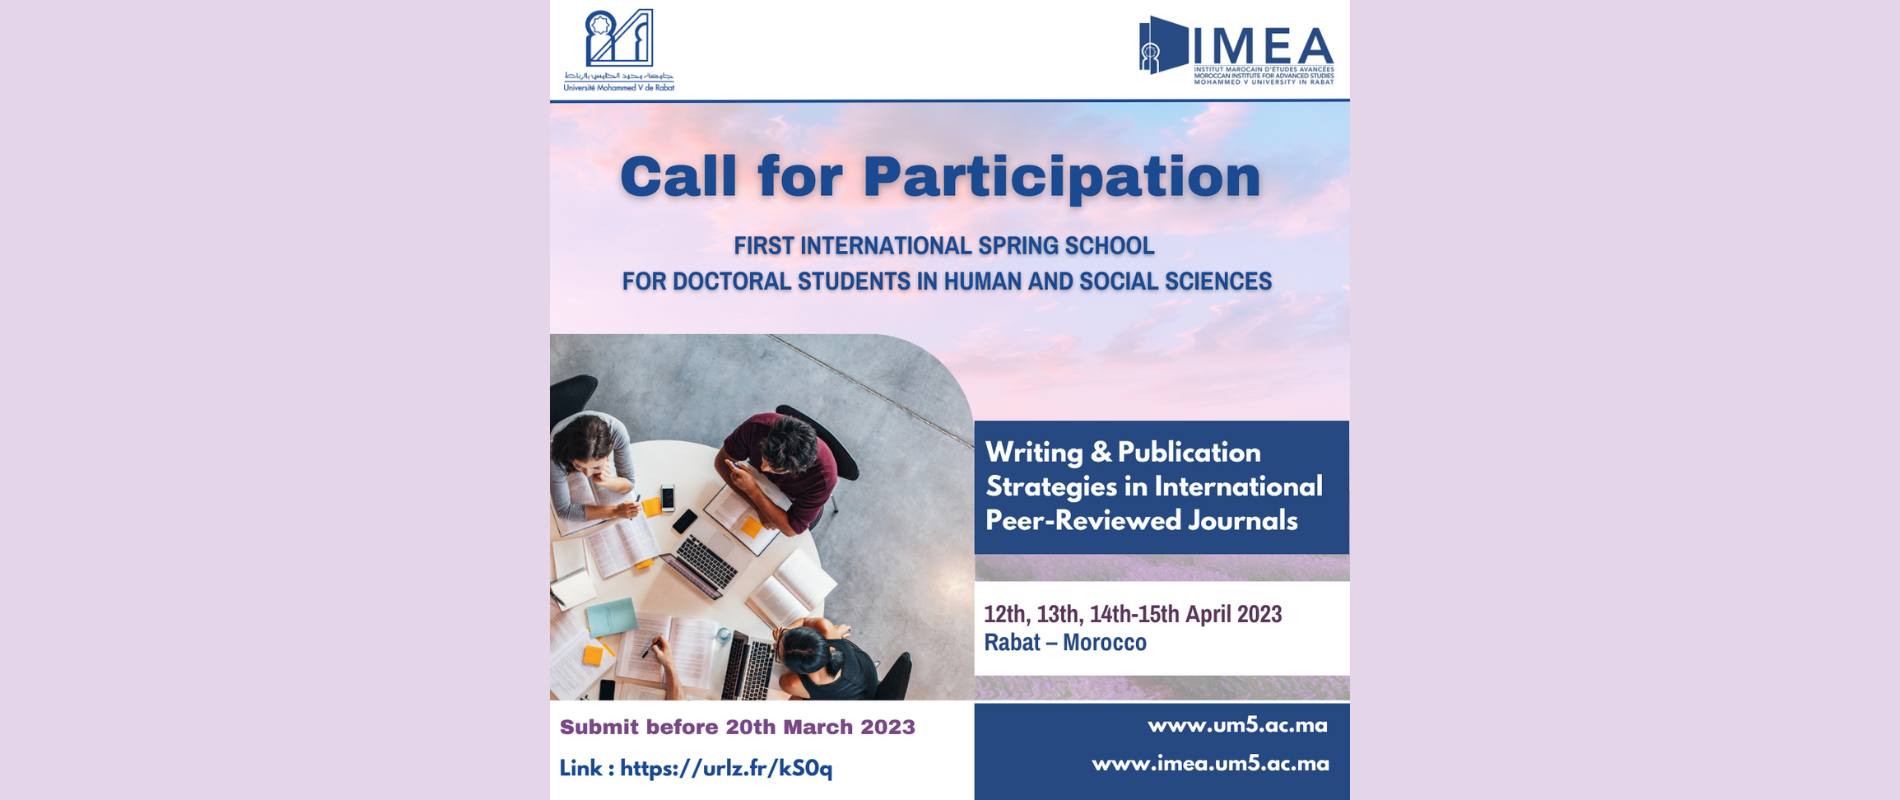 First International Spring School for Doctoral Students